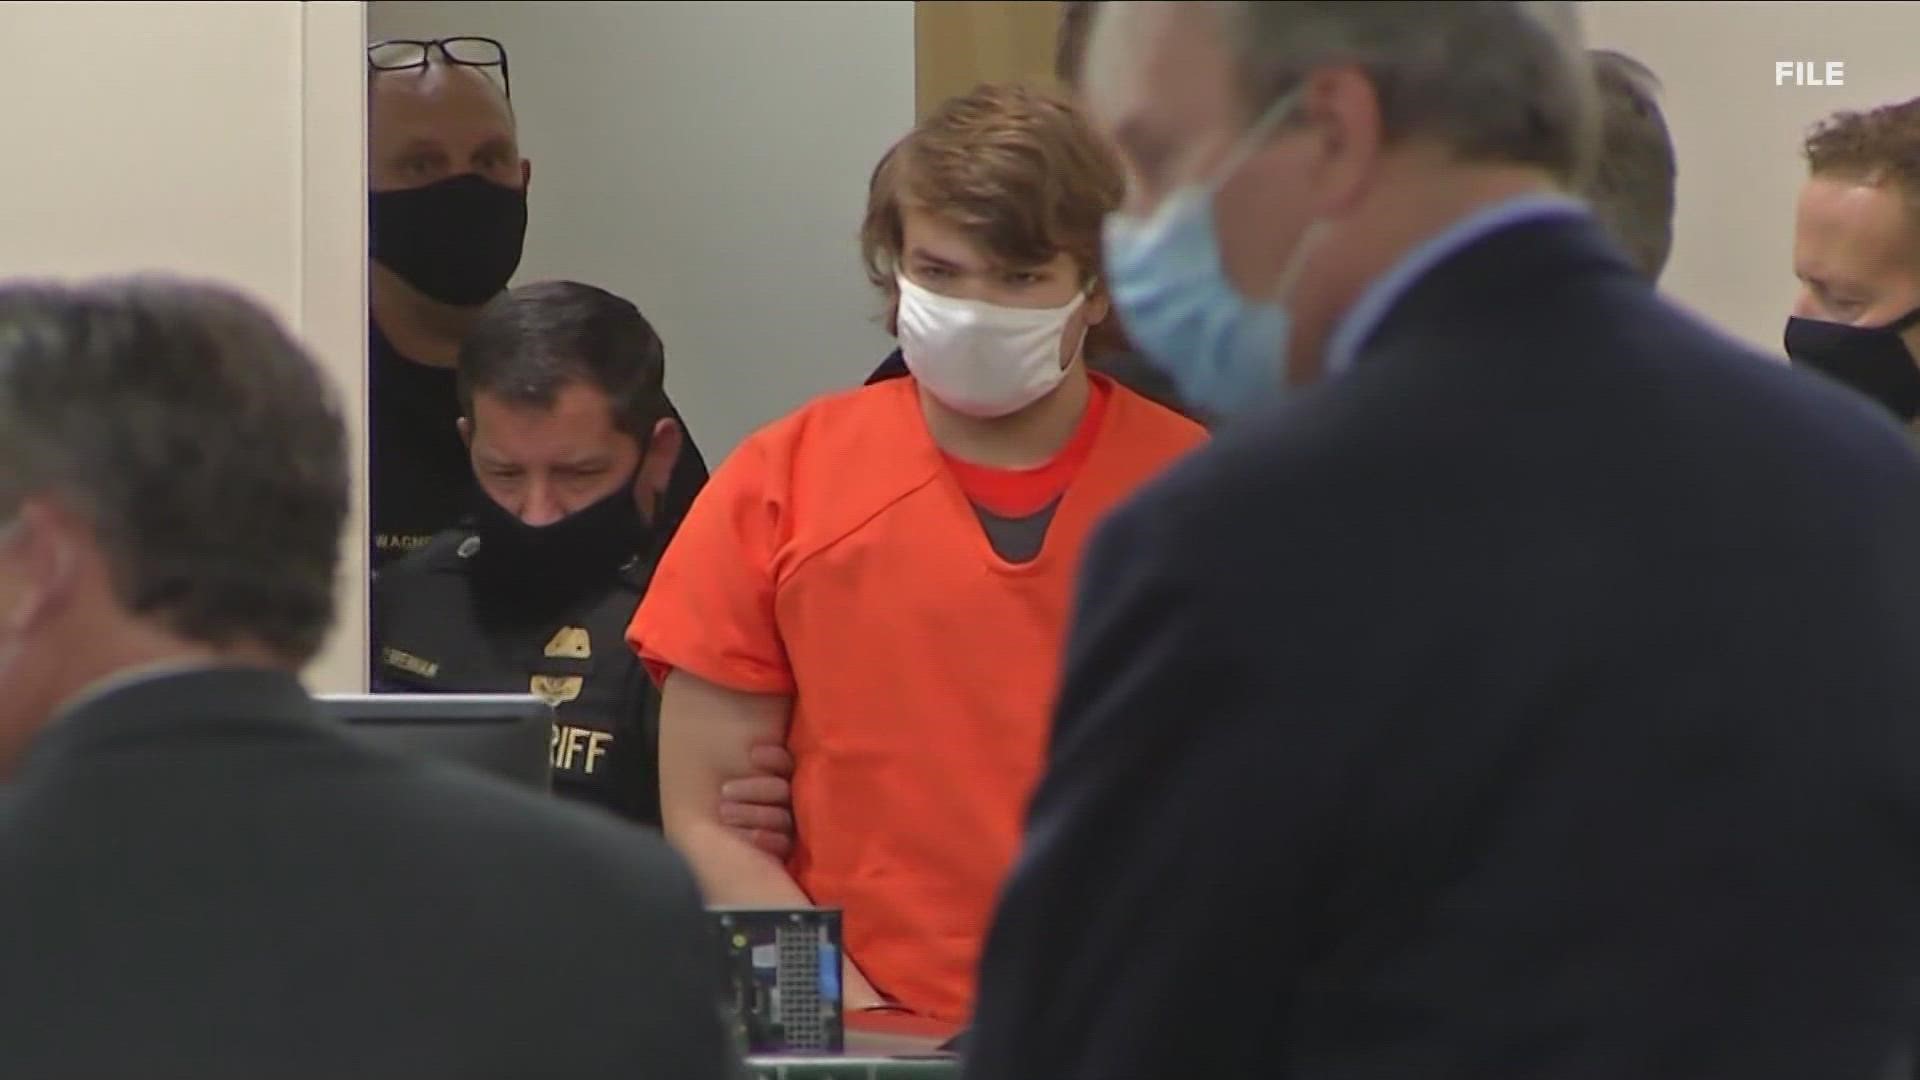 Payton Gendron, the accused shooter, is expected in court Monday after his initial hearing was rescheduled from last week due to the lake effect snow storm.